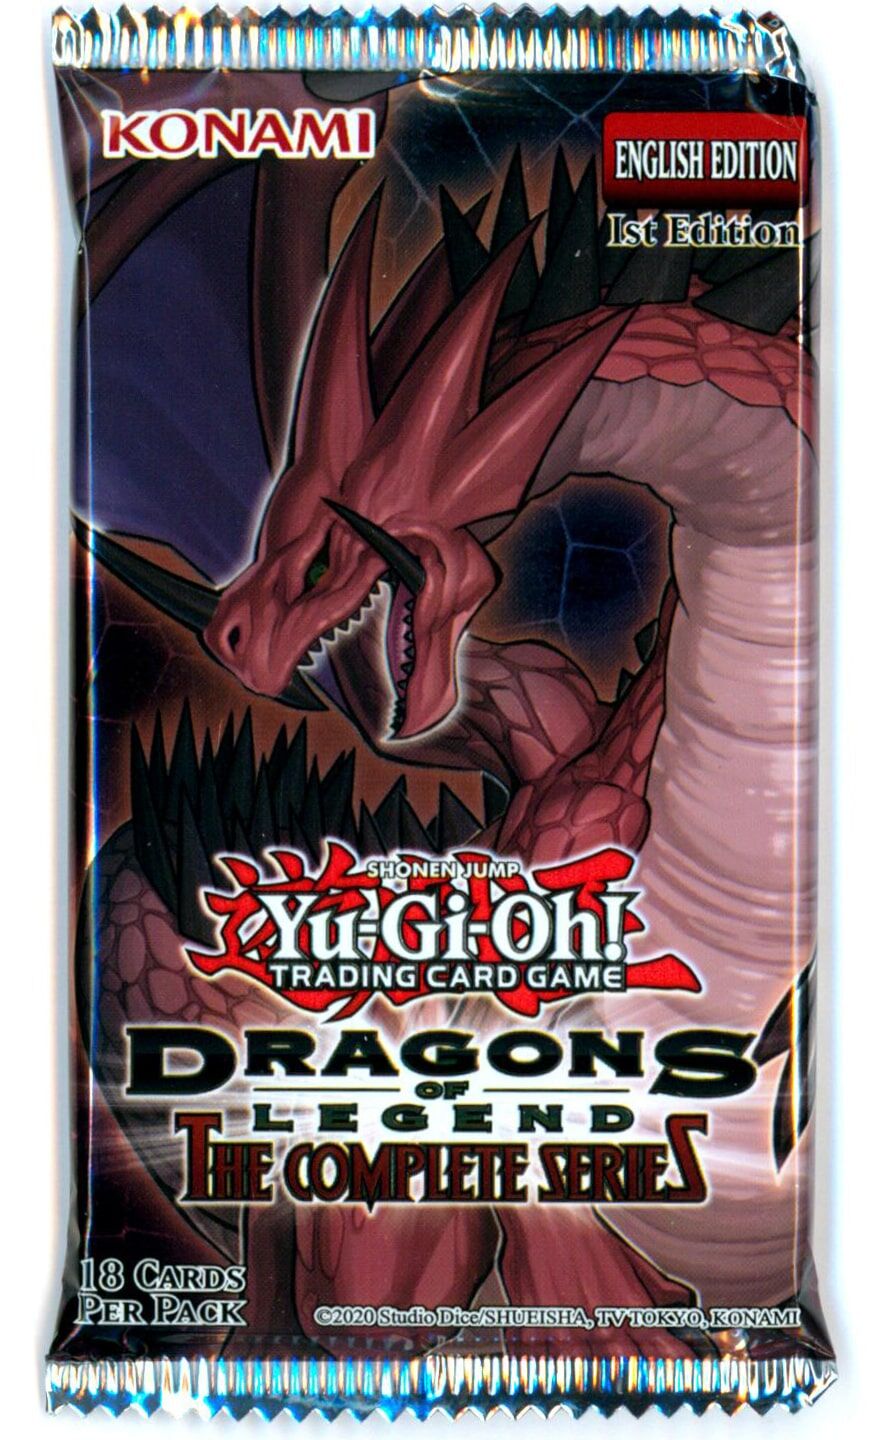 Dragons of Legend: The Complete Series Booster - Yu-Gi-Oh! - EN